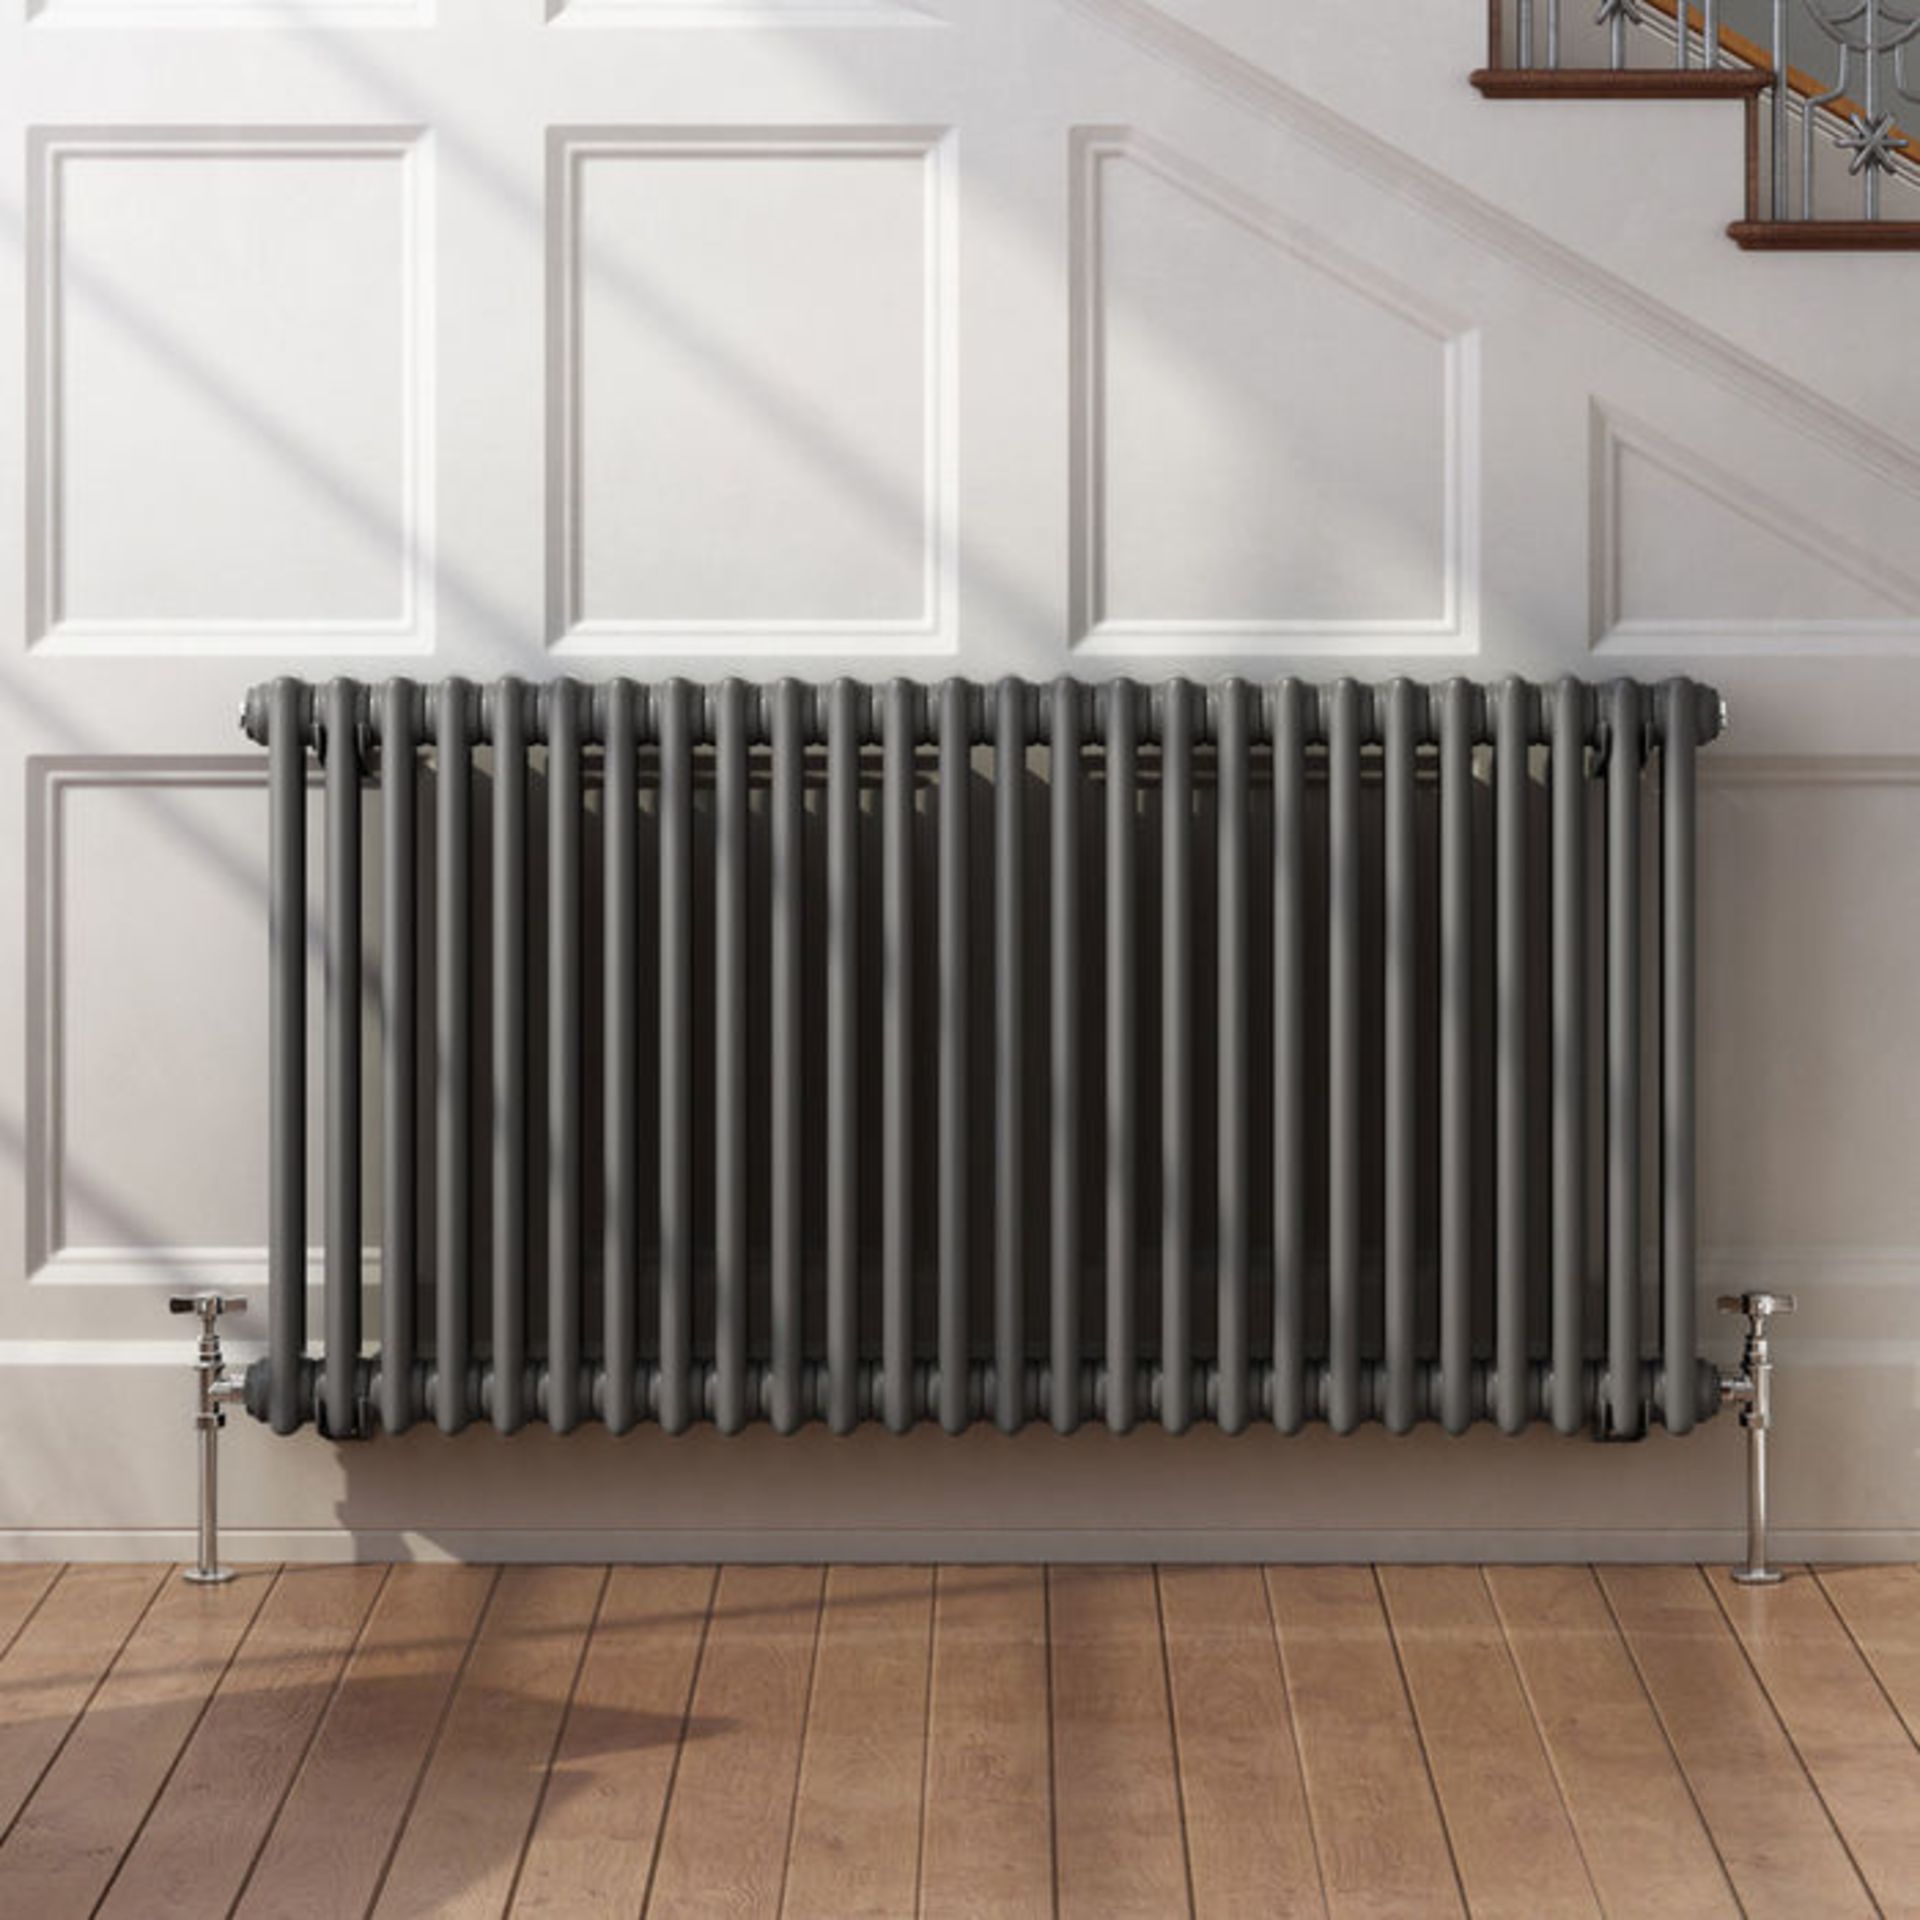 (L181) 600x1188mm Anthracite Double Panel Horizontal Colosseum Traditional Radiator. RRP £599.99. - Image 3 of 3